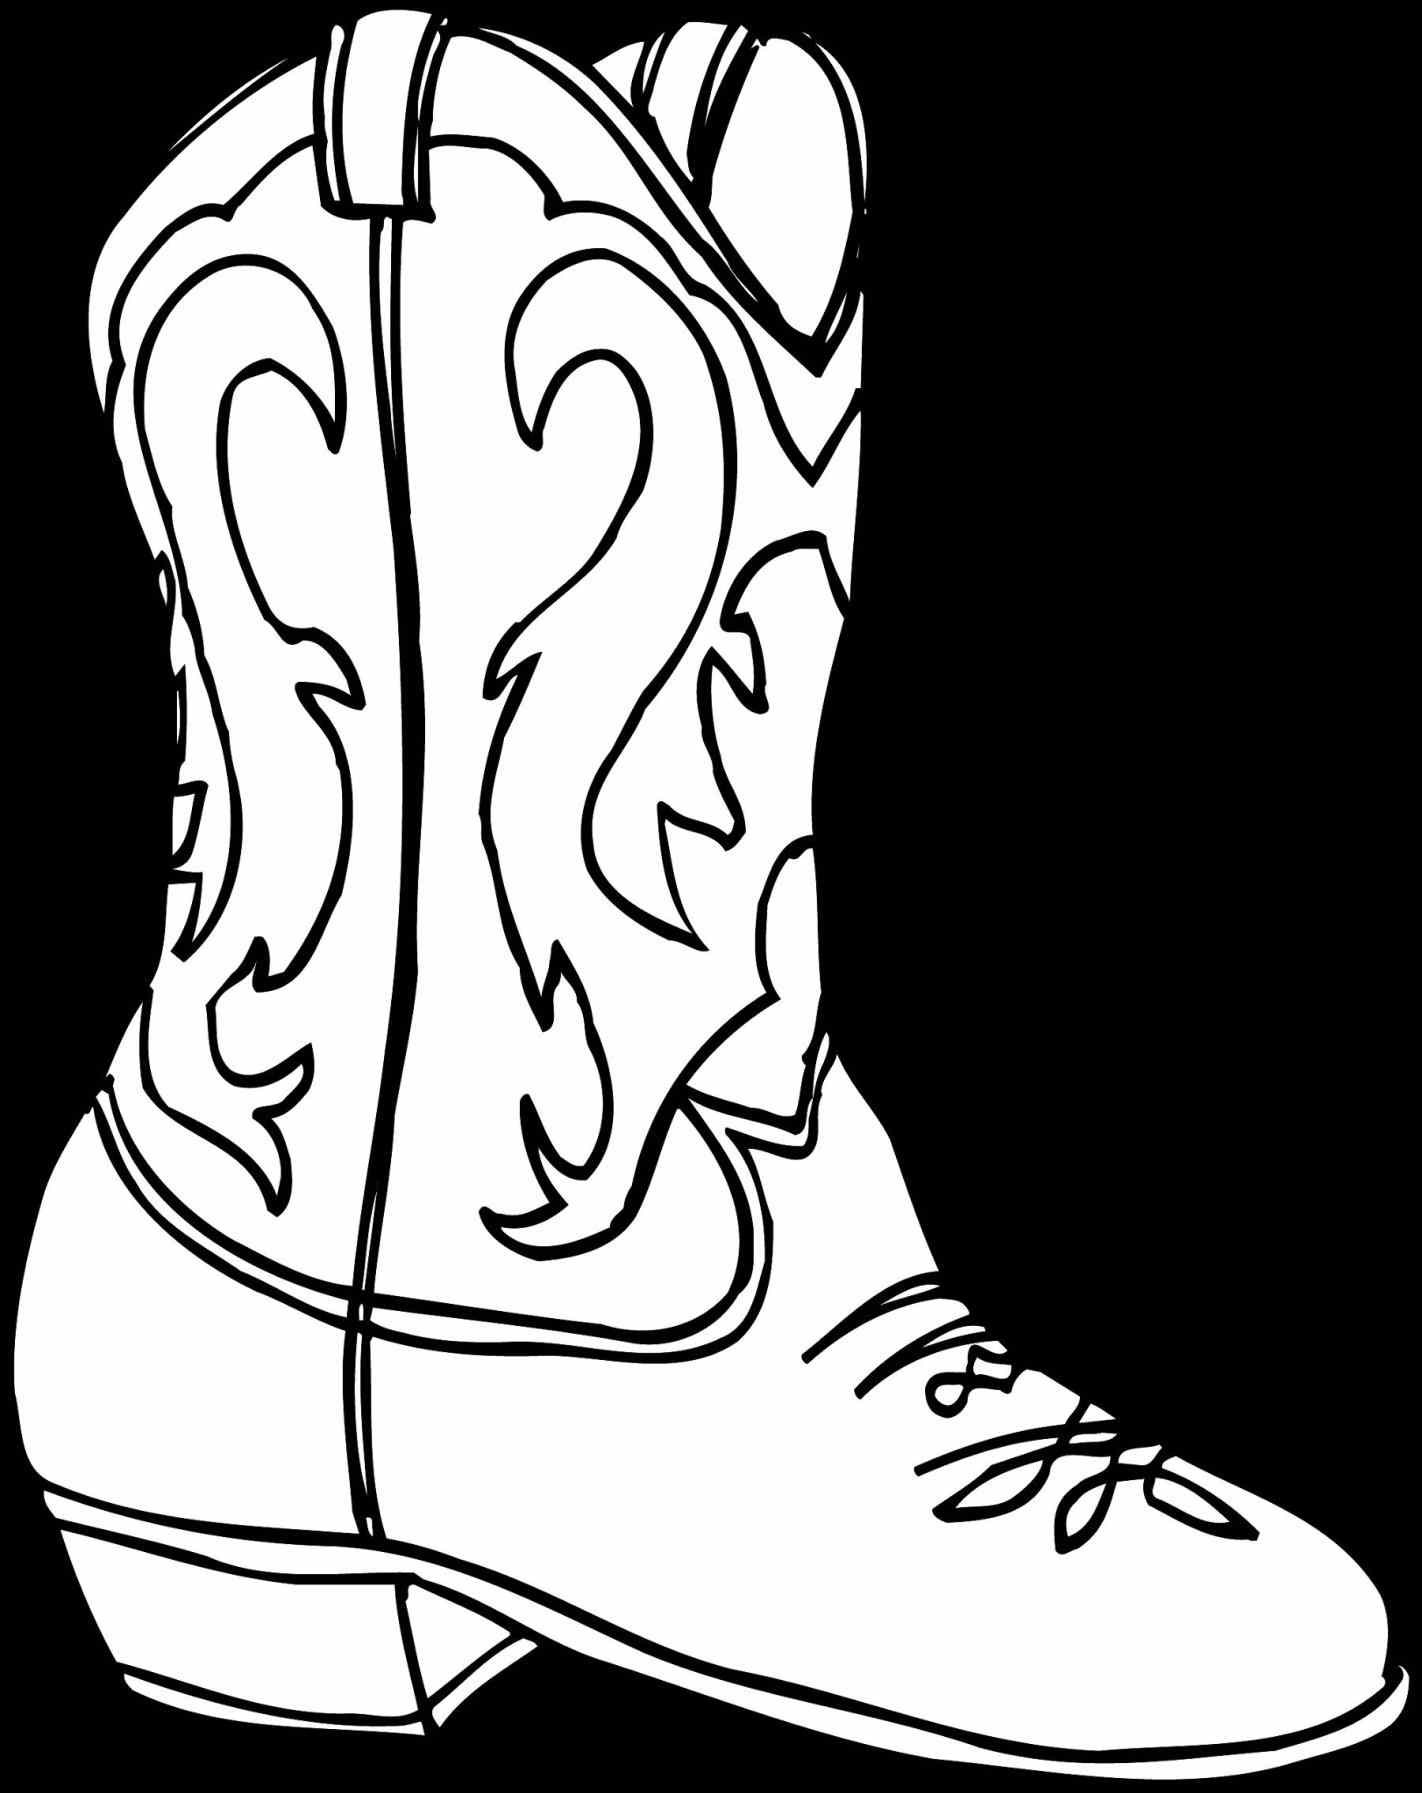 Cowboy Boot Coloring Page at GetColorings.com | Free printable ...